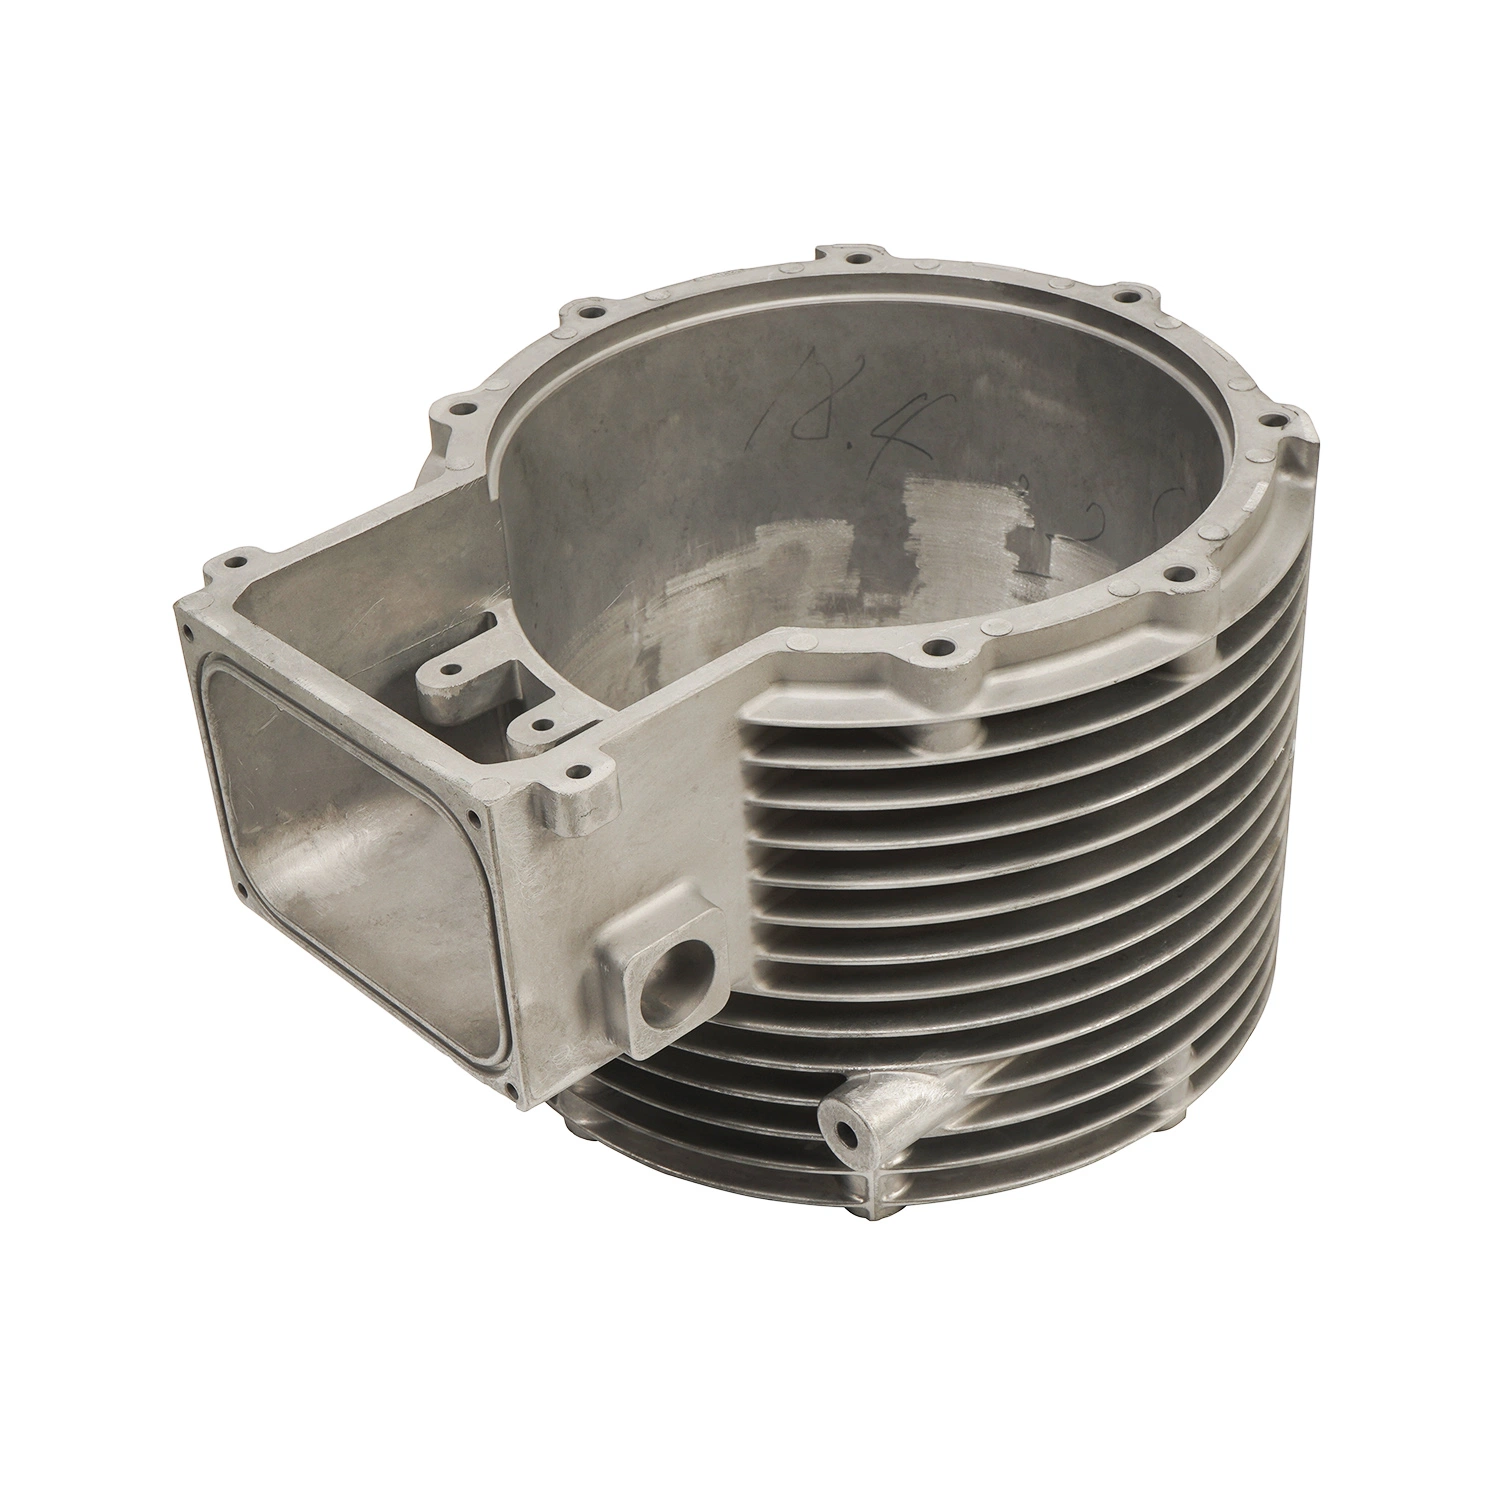 Aluminum Die Casting Motor Housing for The Electromotor / Electric Motor Industry